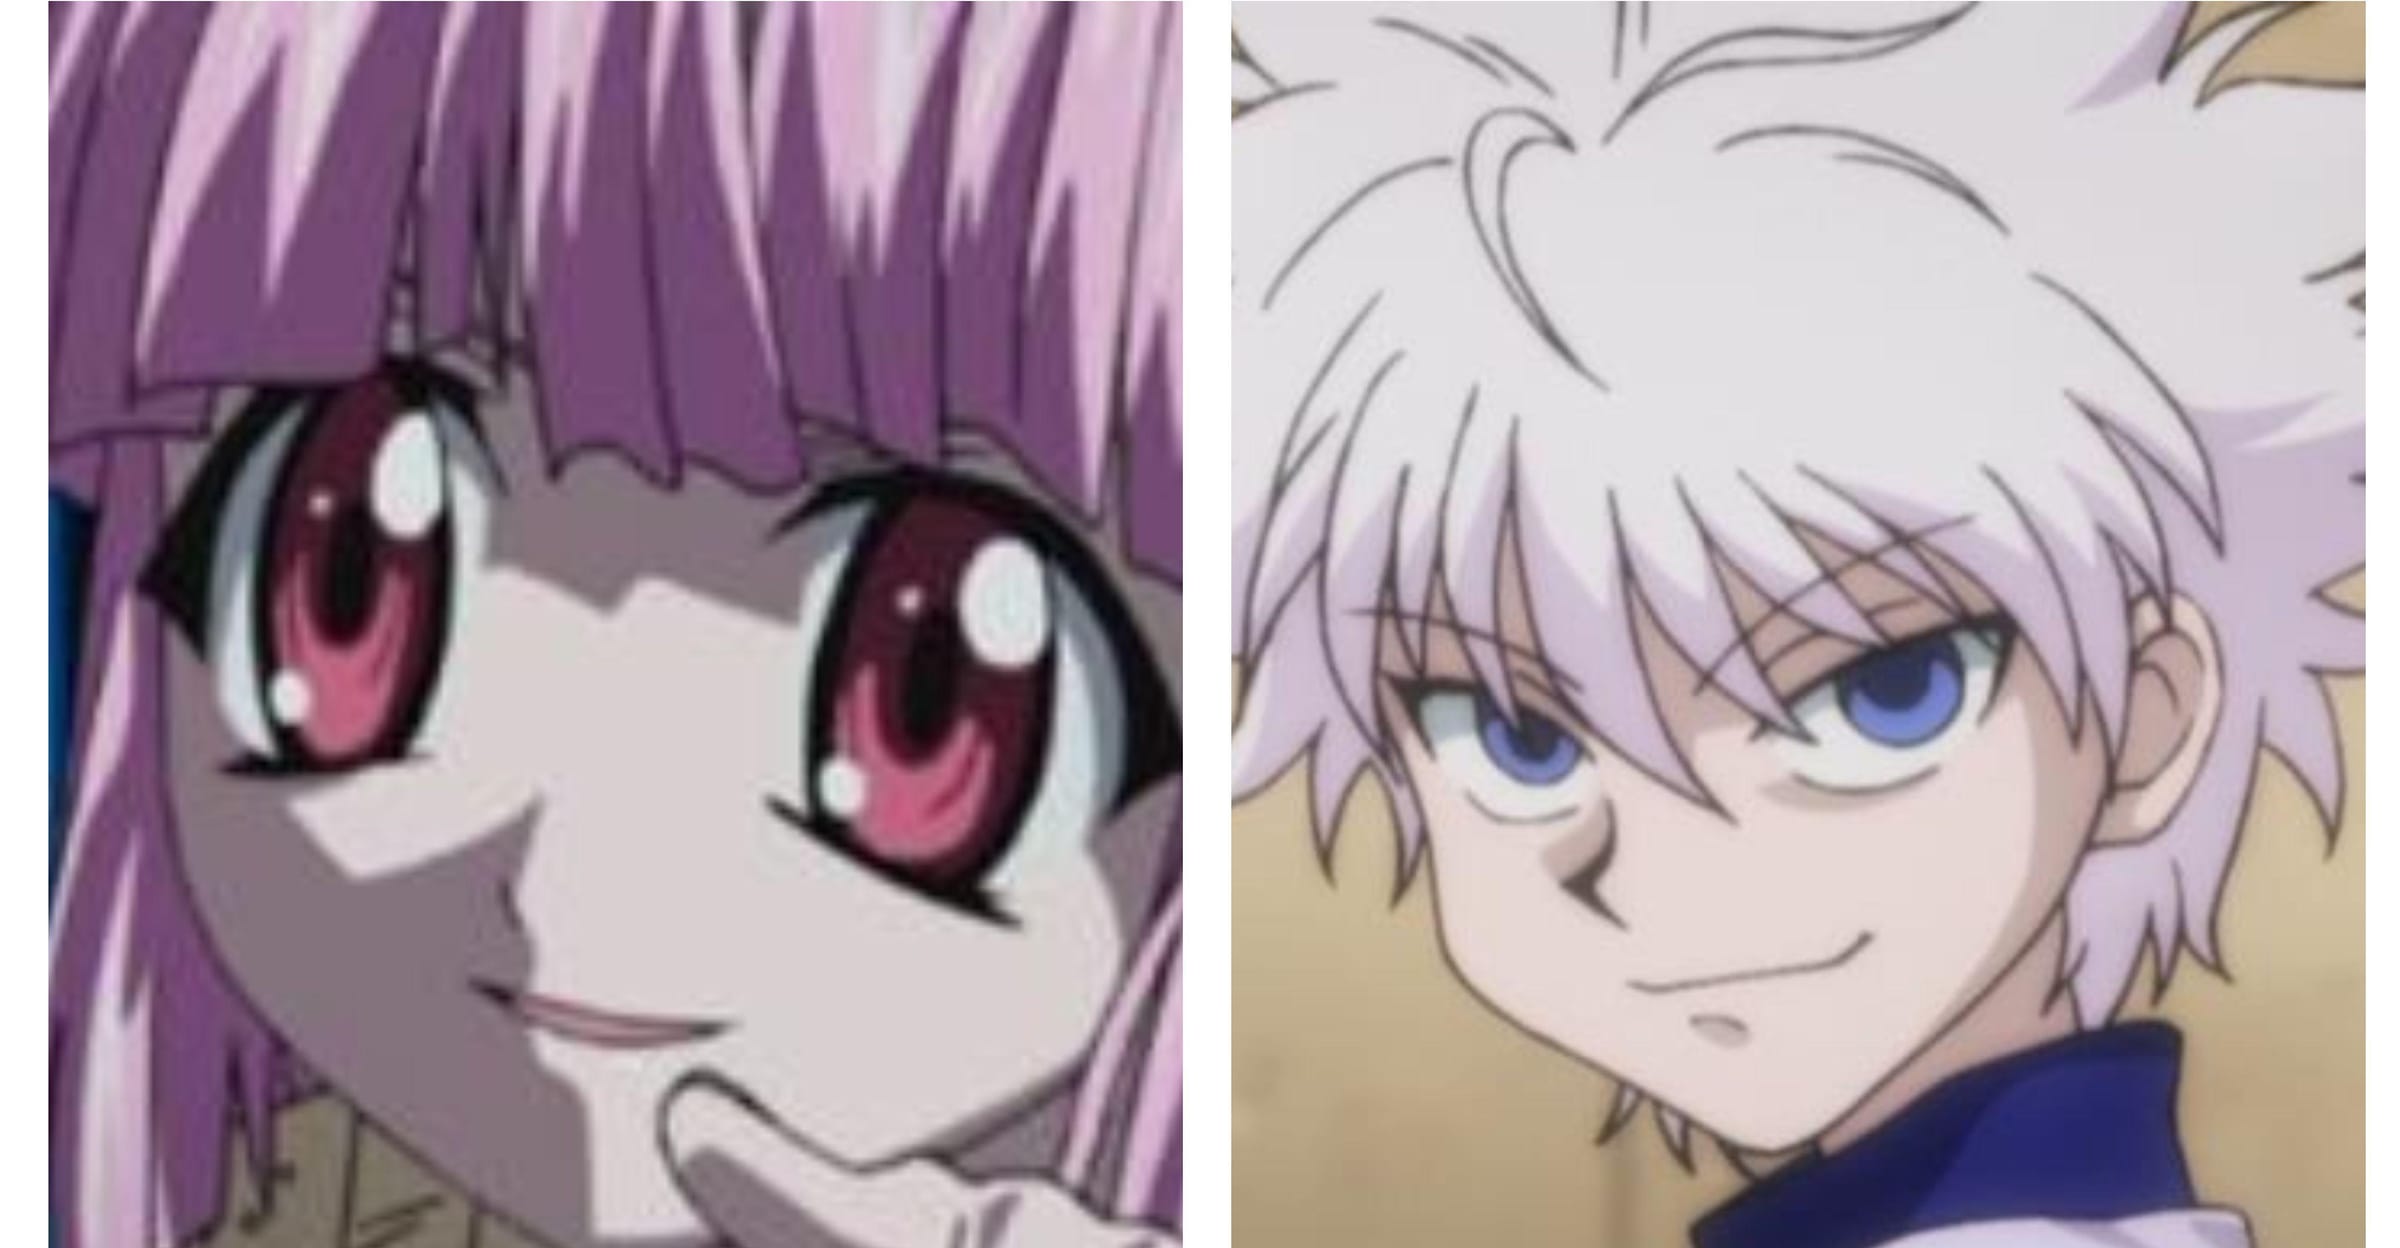 Why did Netflix remove Hunter x Hunter anime? Explained